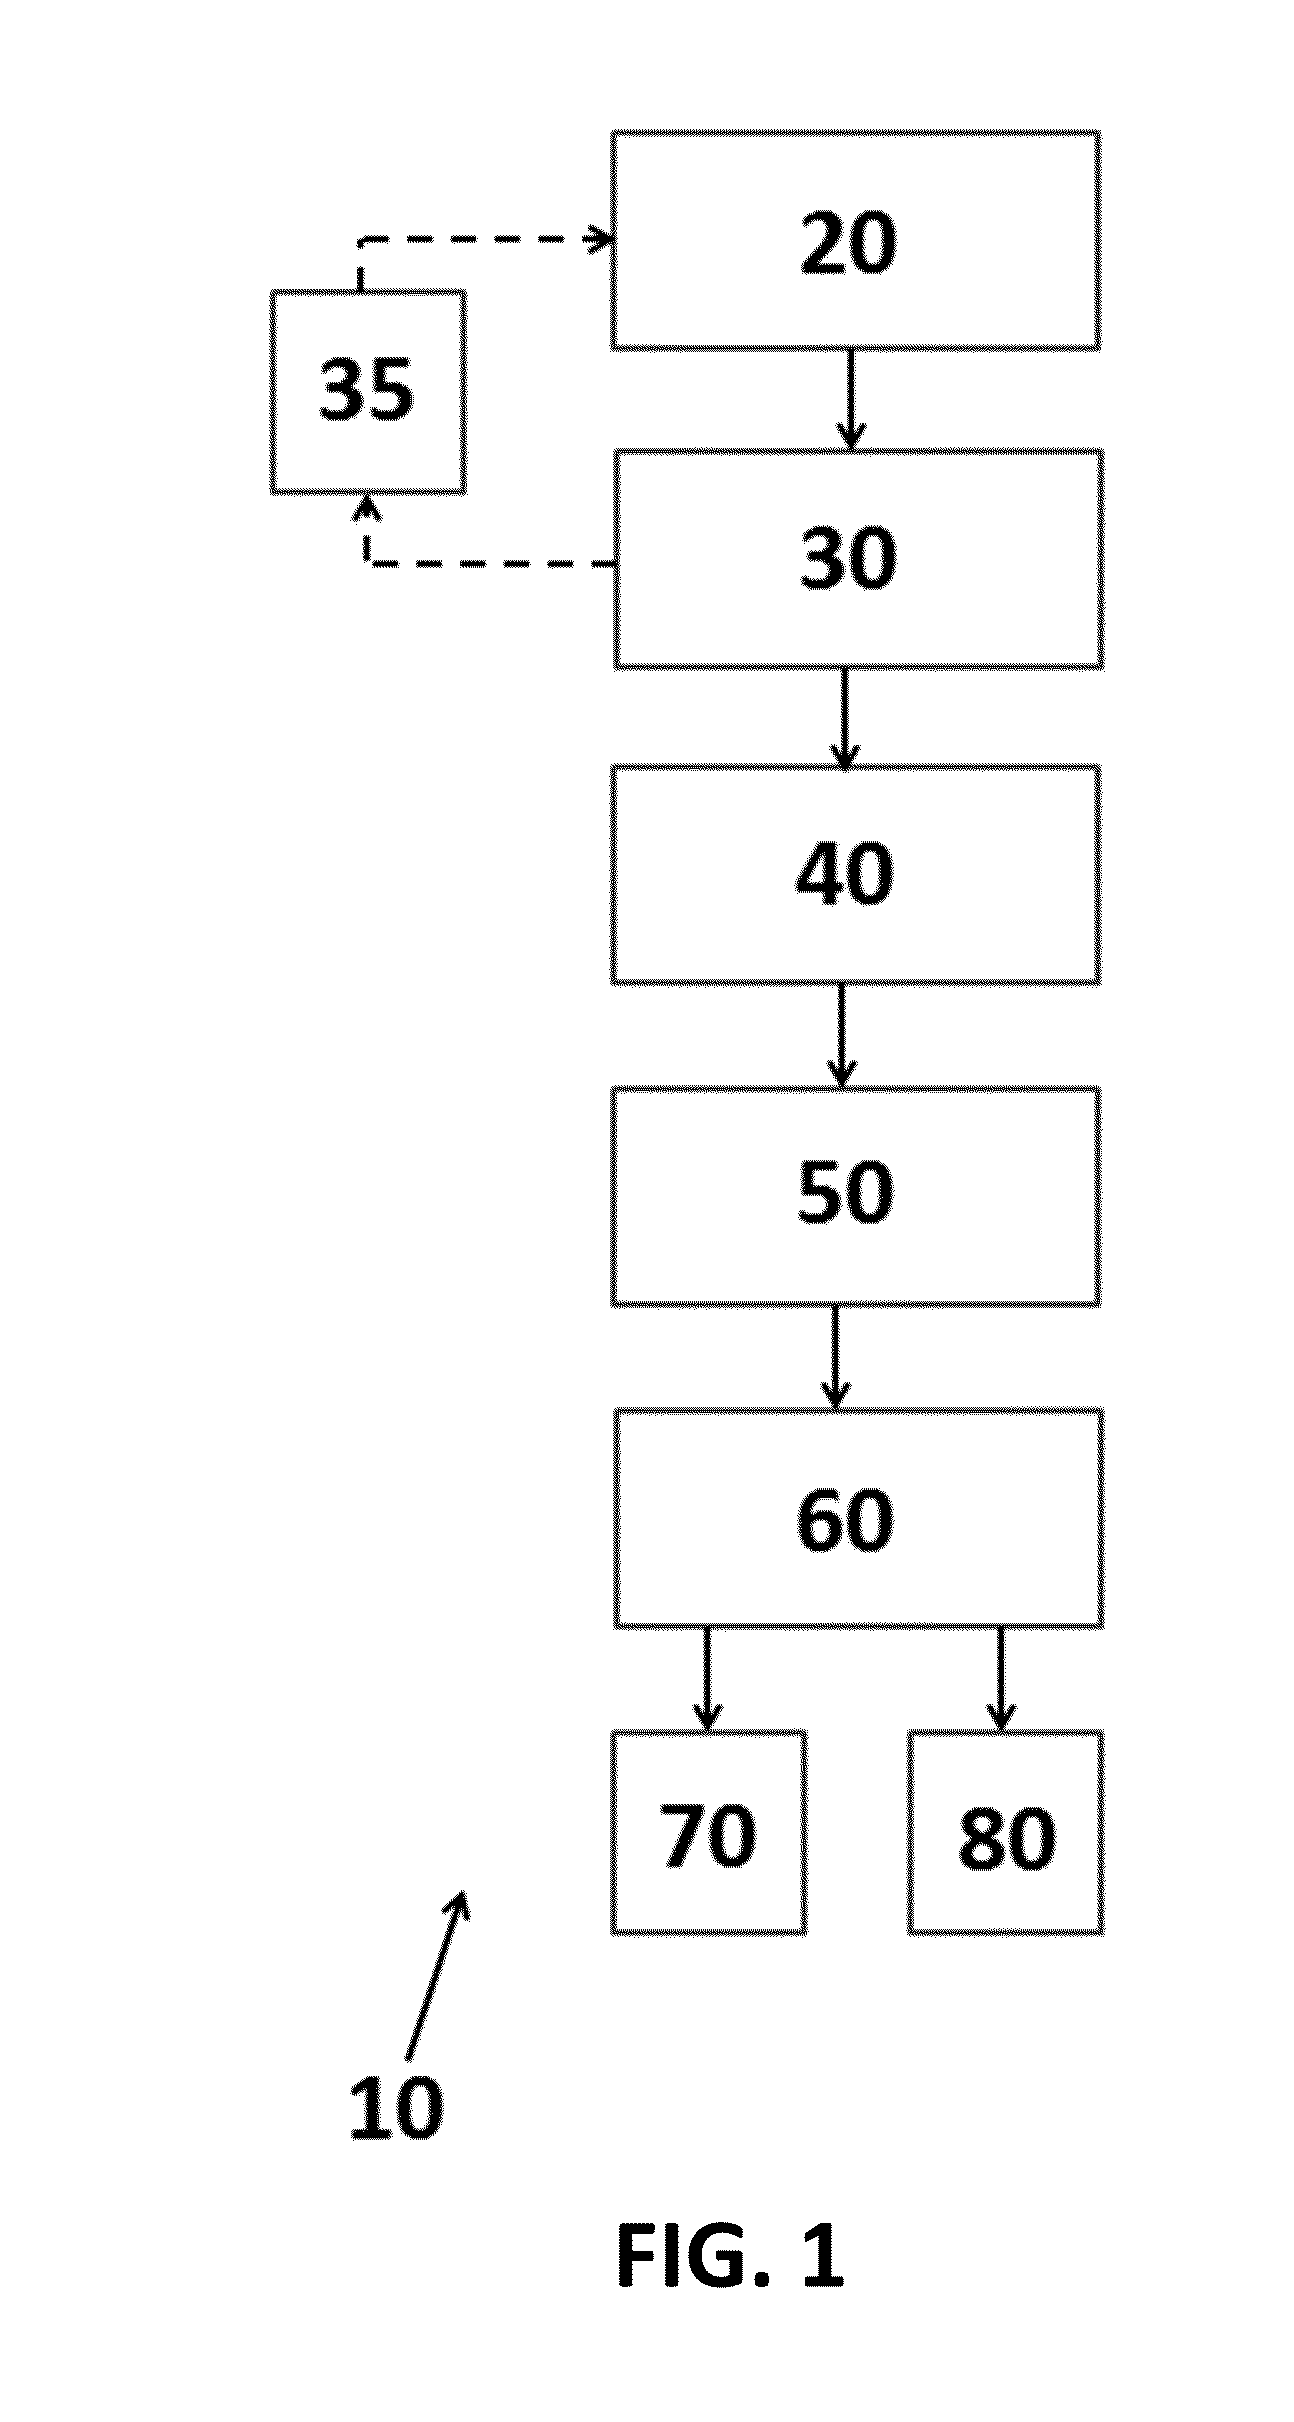 Method of modeling roof age of a structure